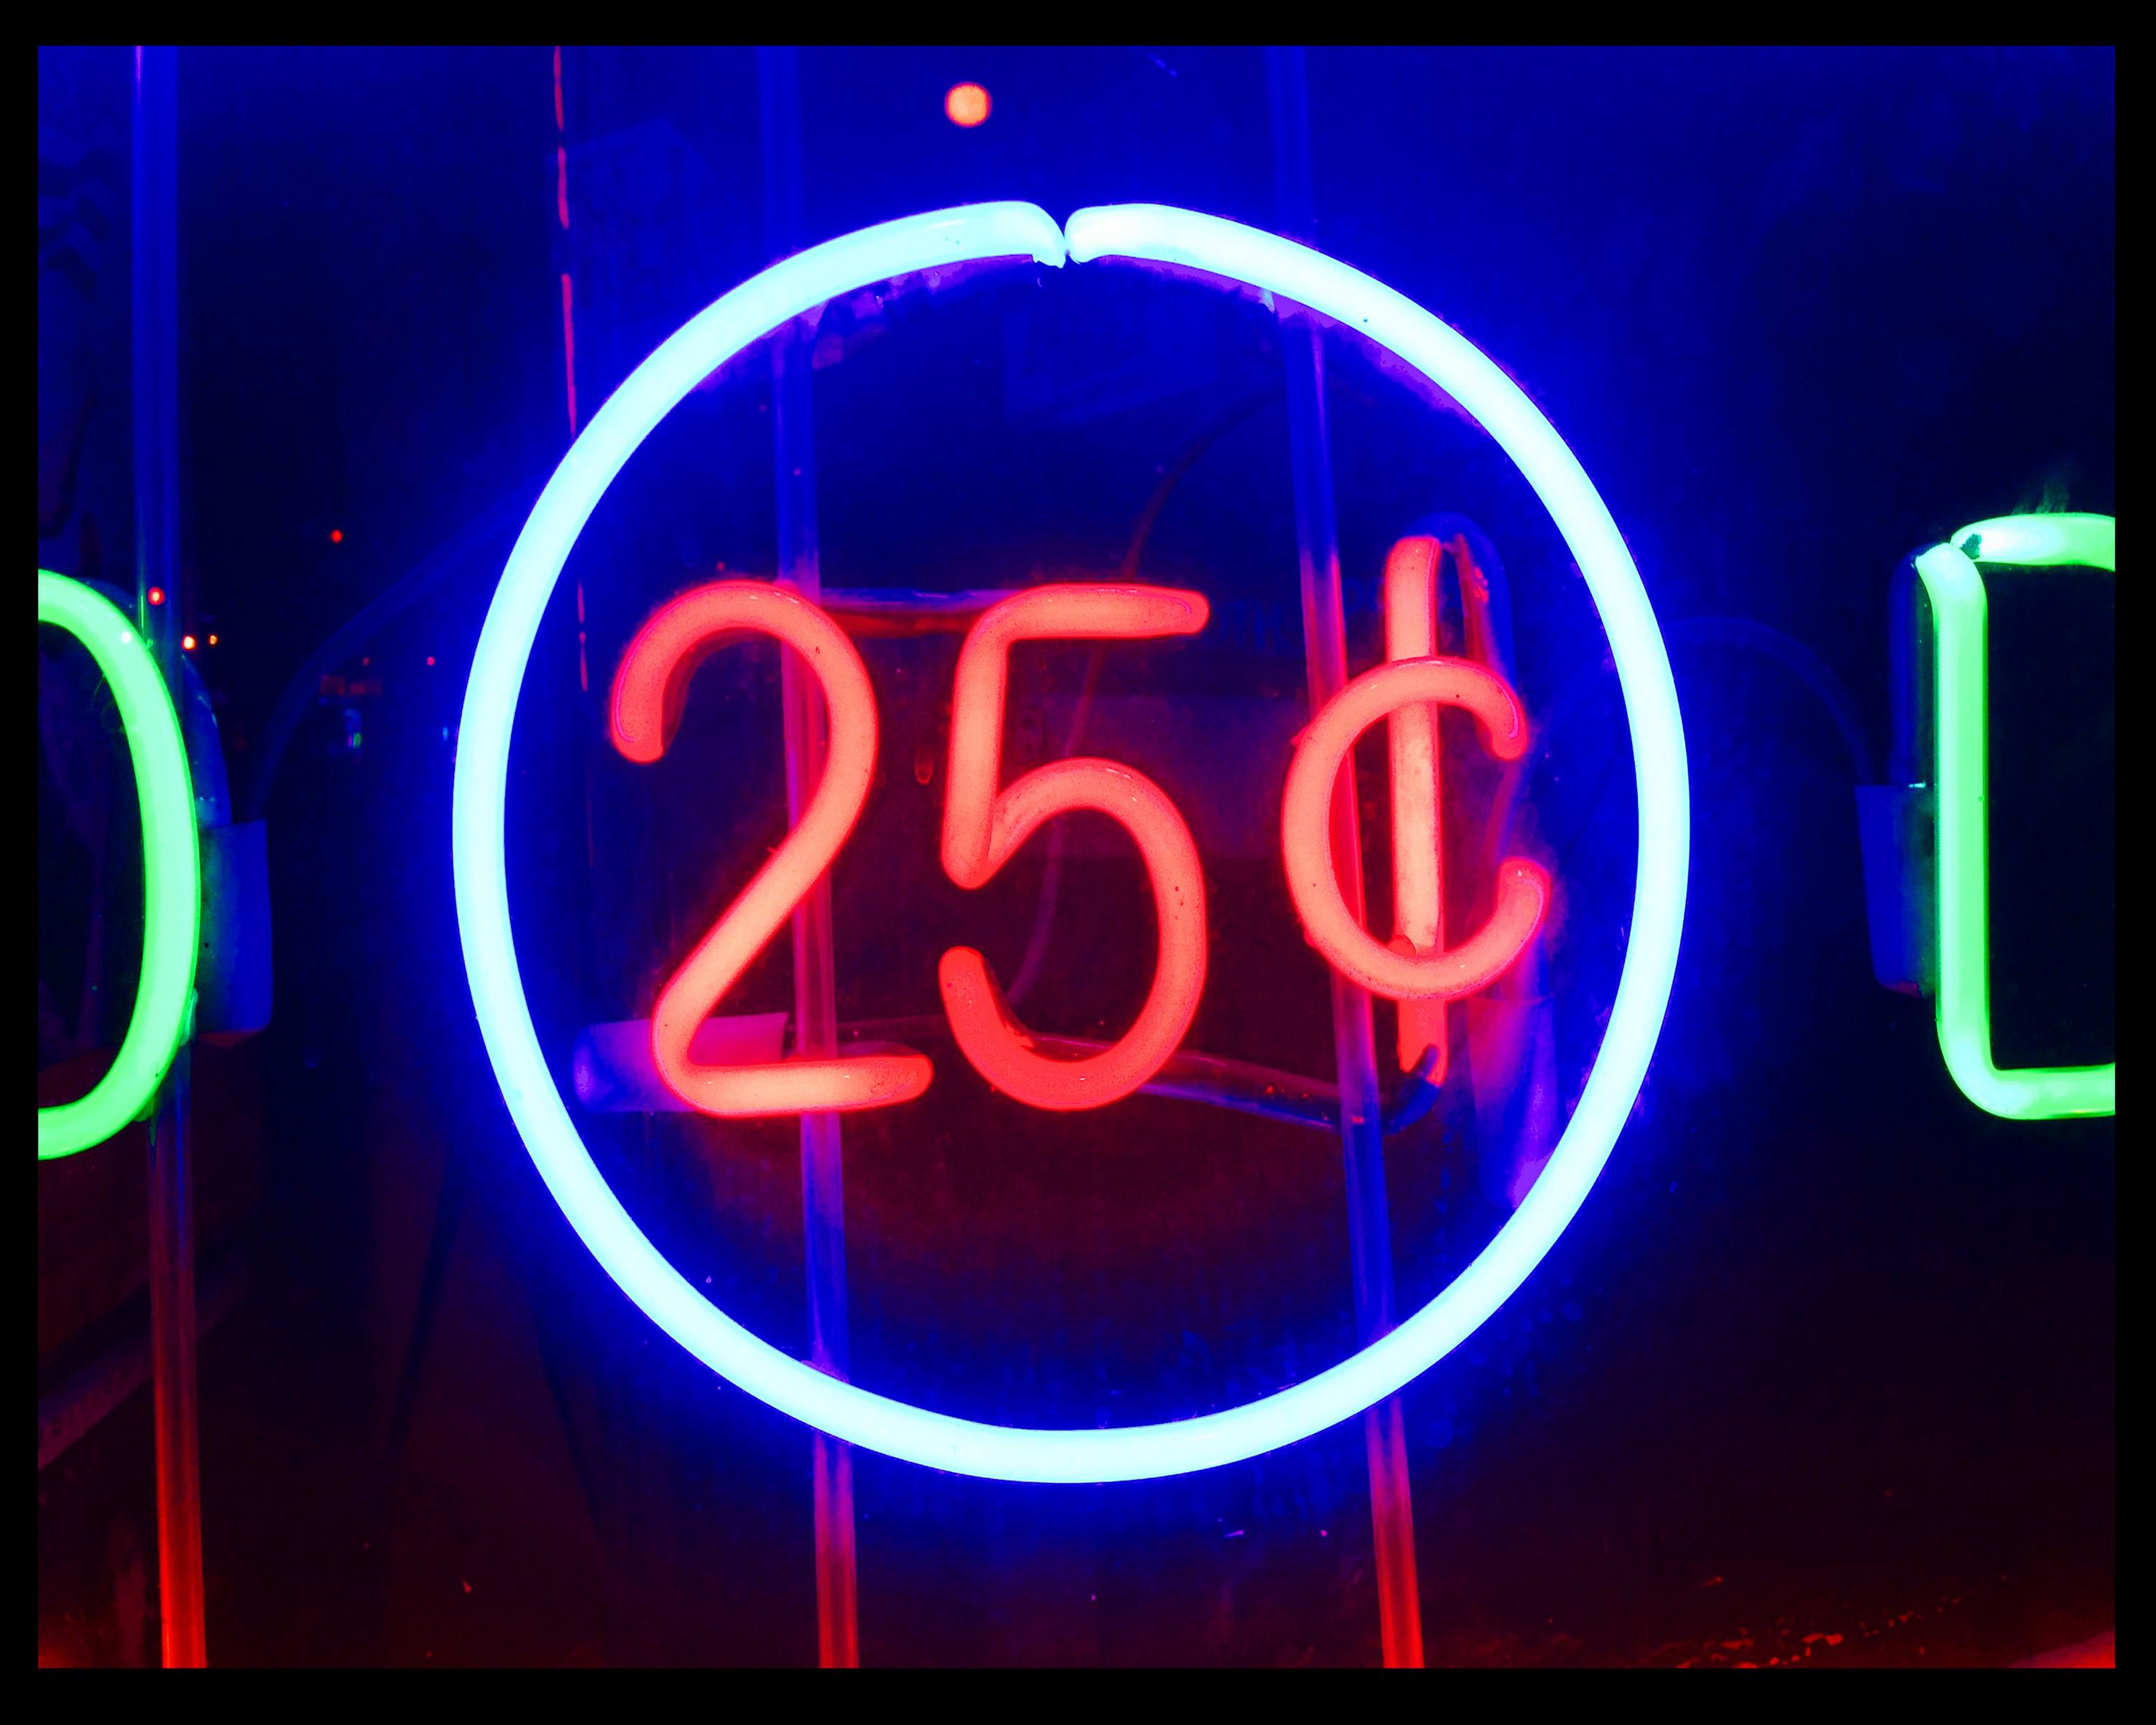 Richard Heeps Color Photograph - 25 Cents, New York - Neon Color Street Photography